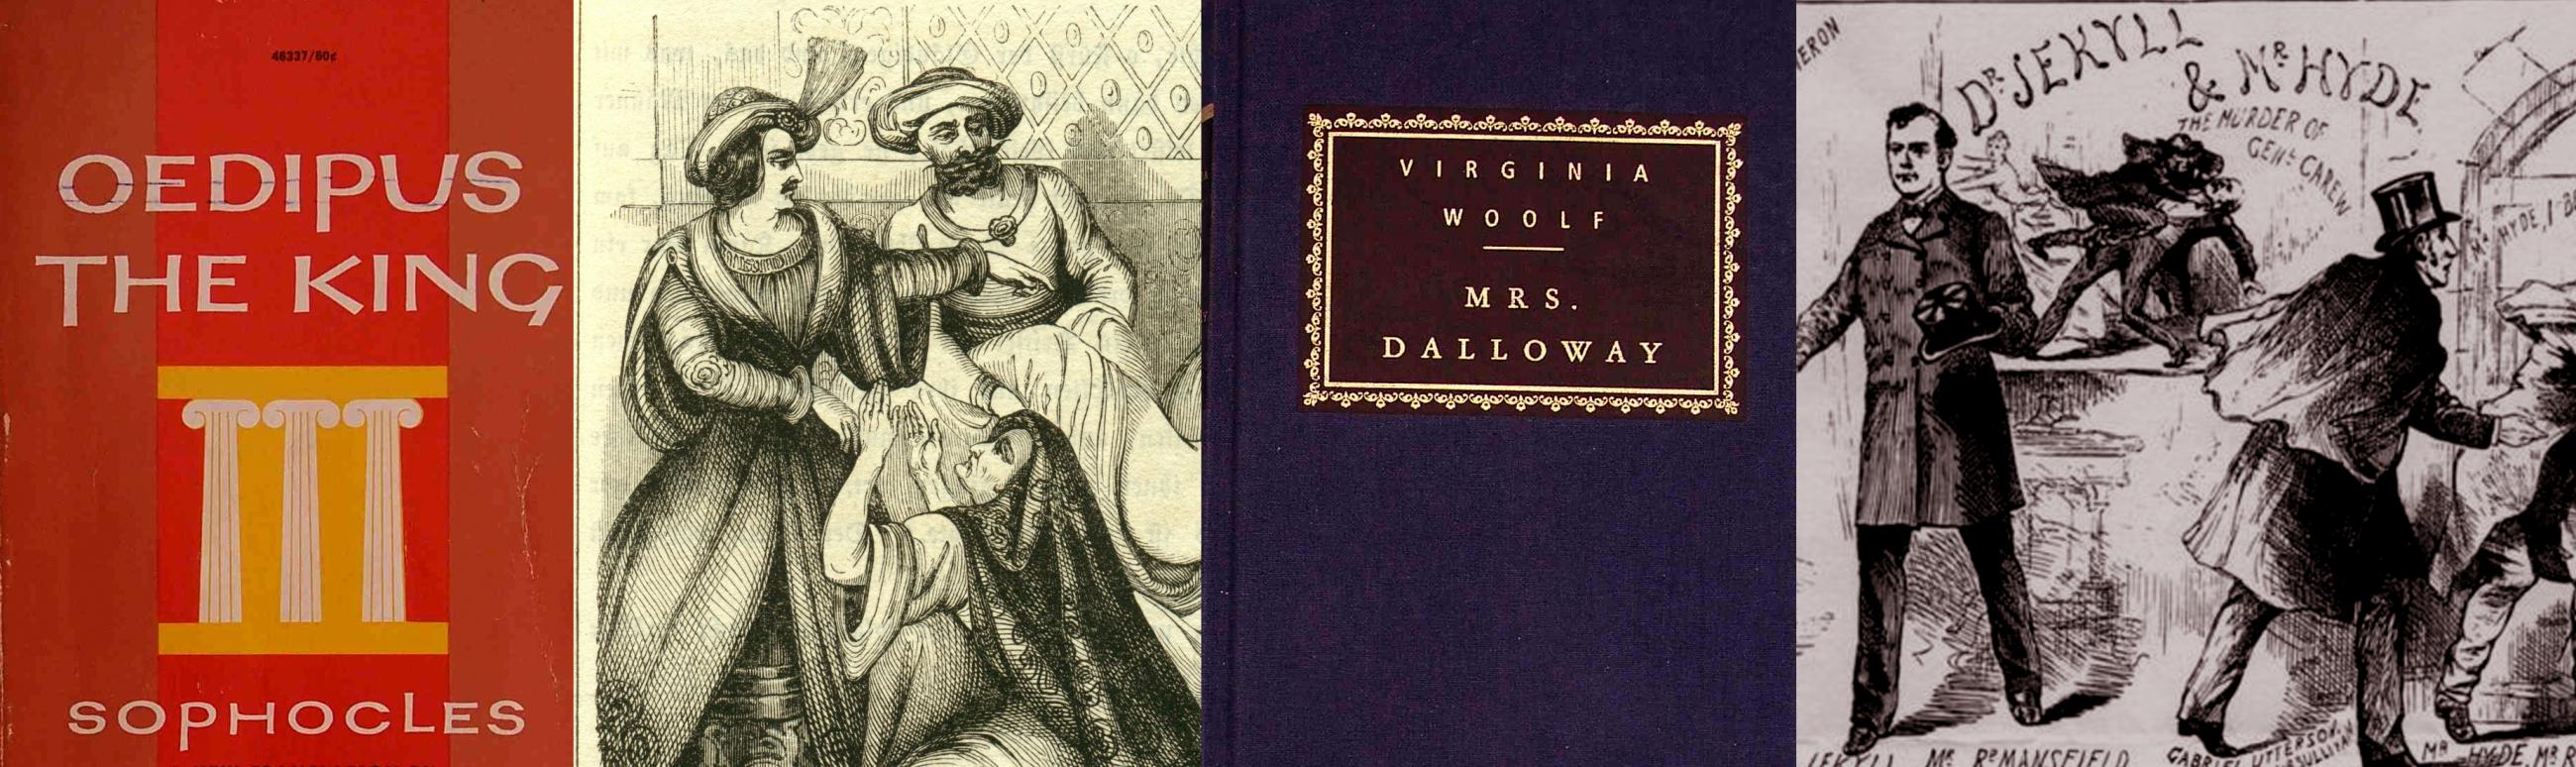 King Oedipus, One Thousand and One Nights (Friedrich Gross), Mrs Dalloway, Dr Jekyll and Mr Hyde